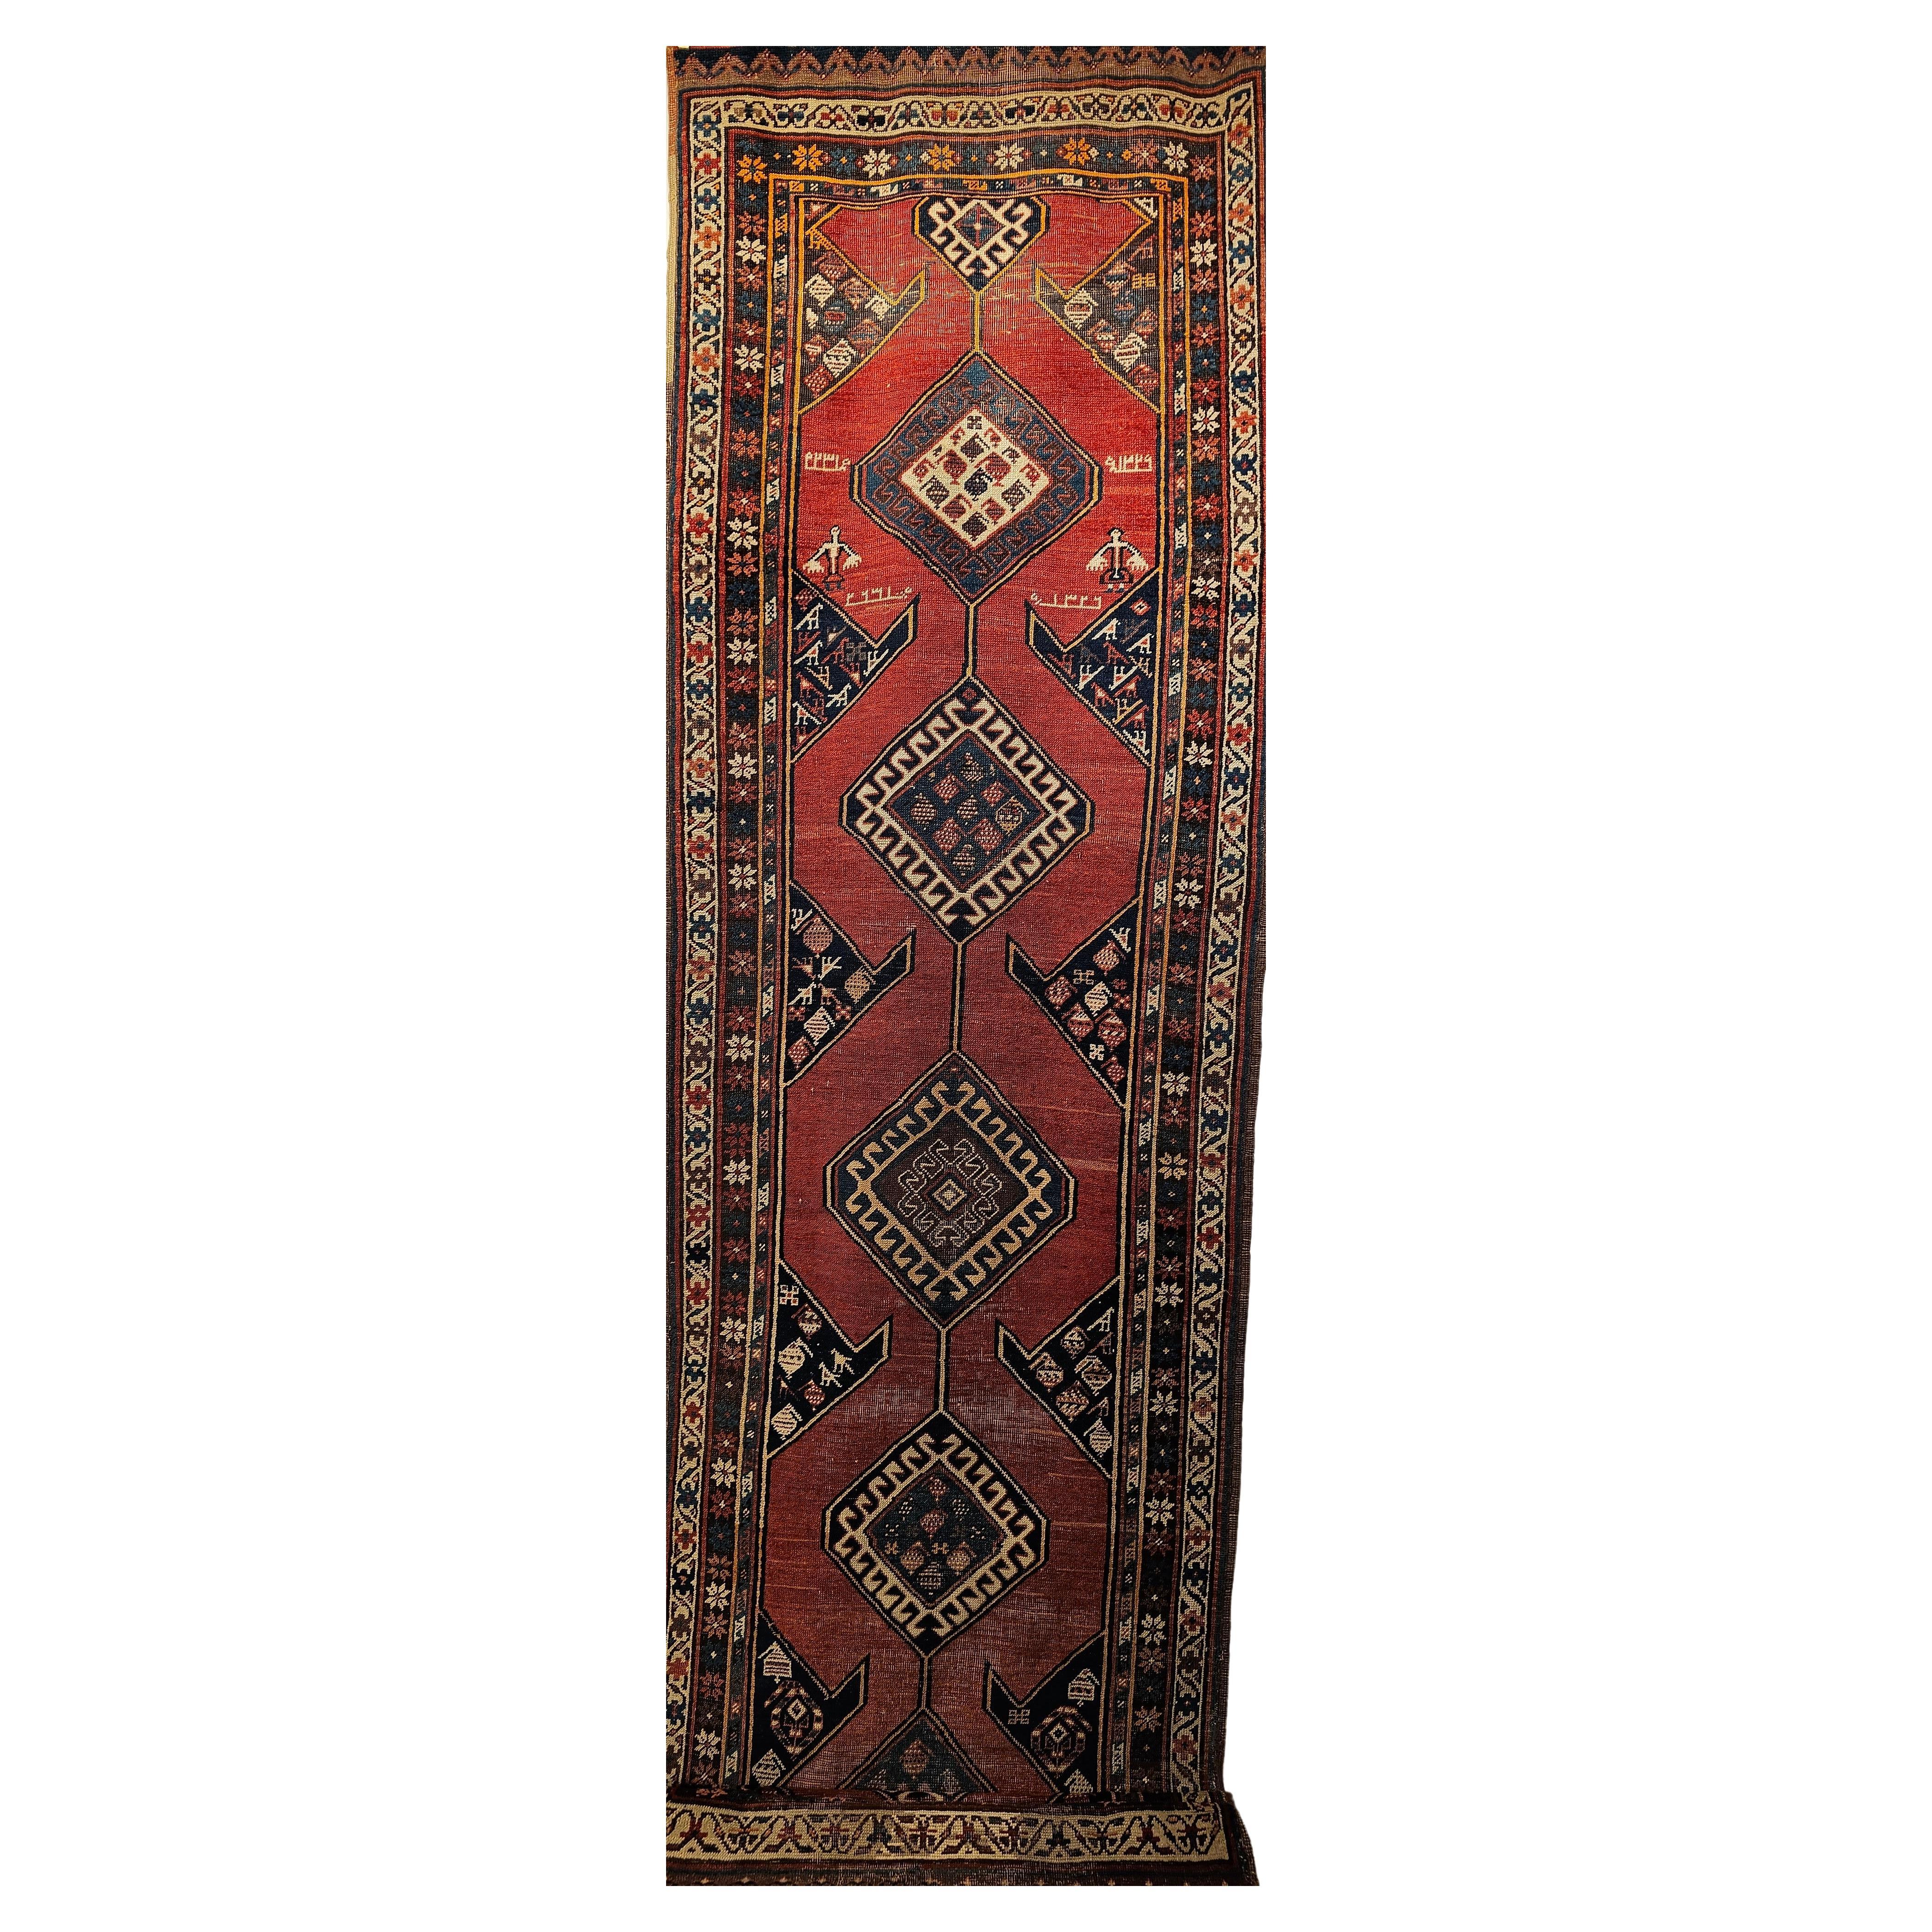 A vintage Kurdish Bidjar runner in a geometric medallion pattern set on an abrash terracotta red field color from the early 1900s.  There are five medallions in the field connected via a line ending in a smaller medallion on each end. The border